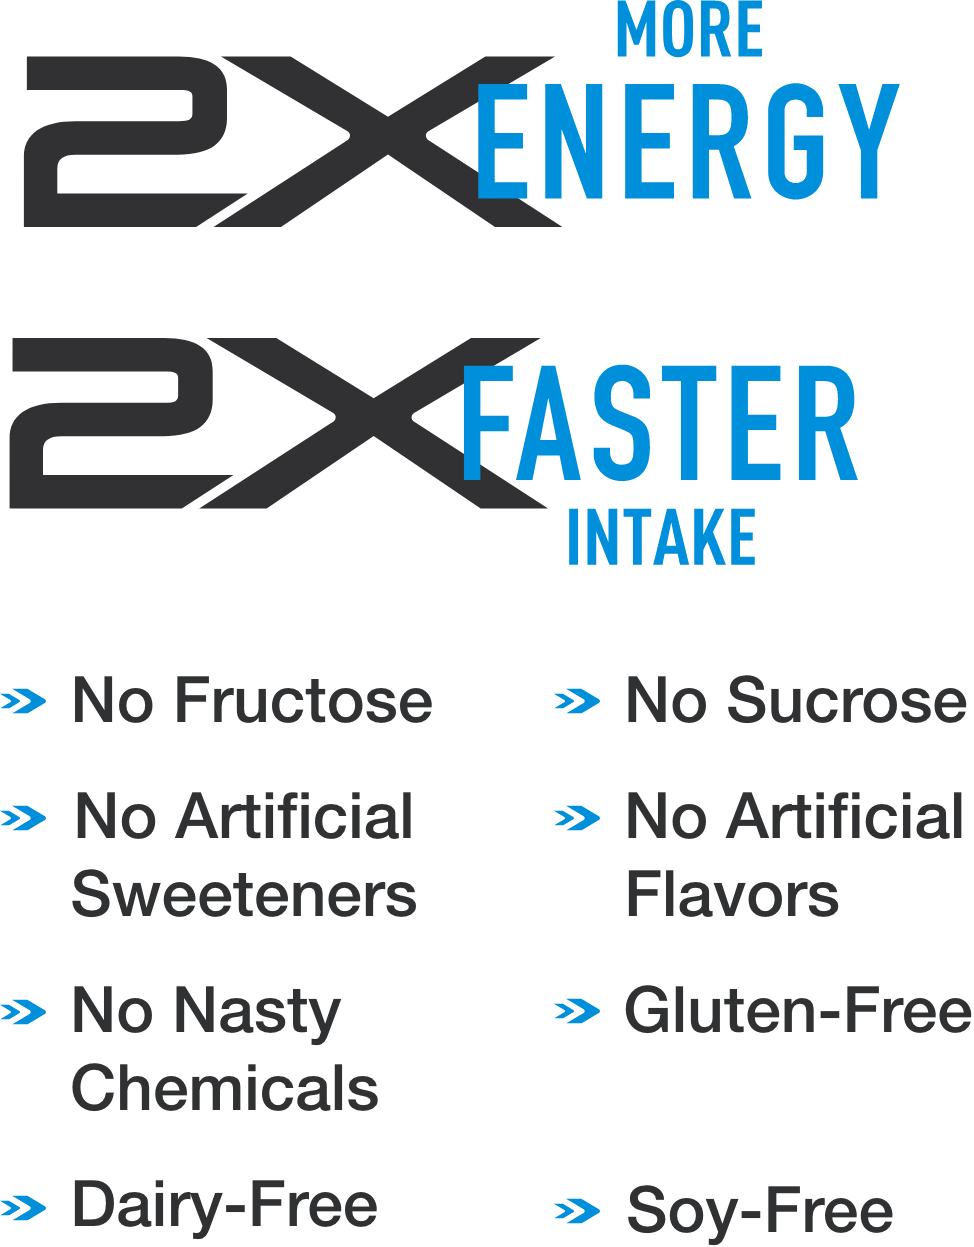 2x More Energy & 2x Faster Intake